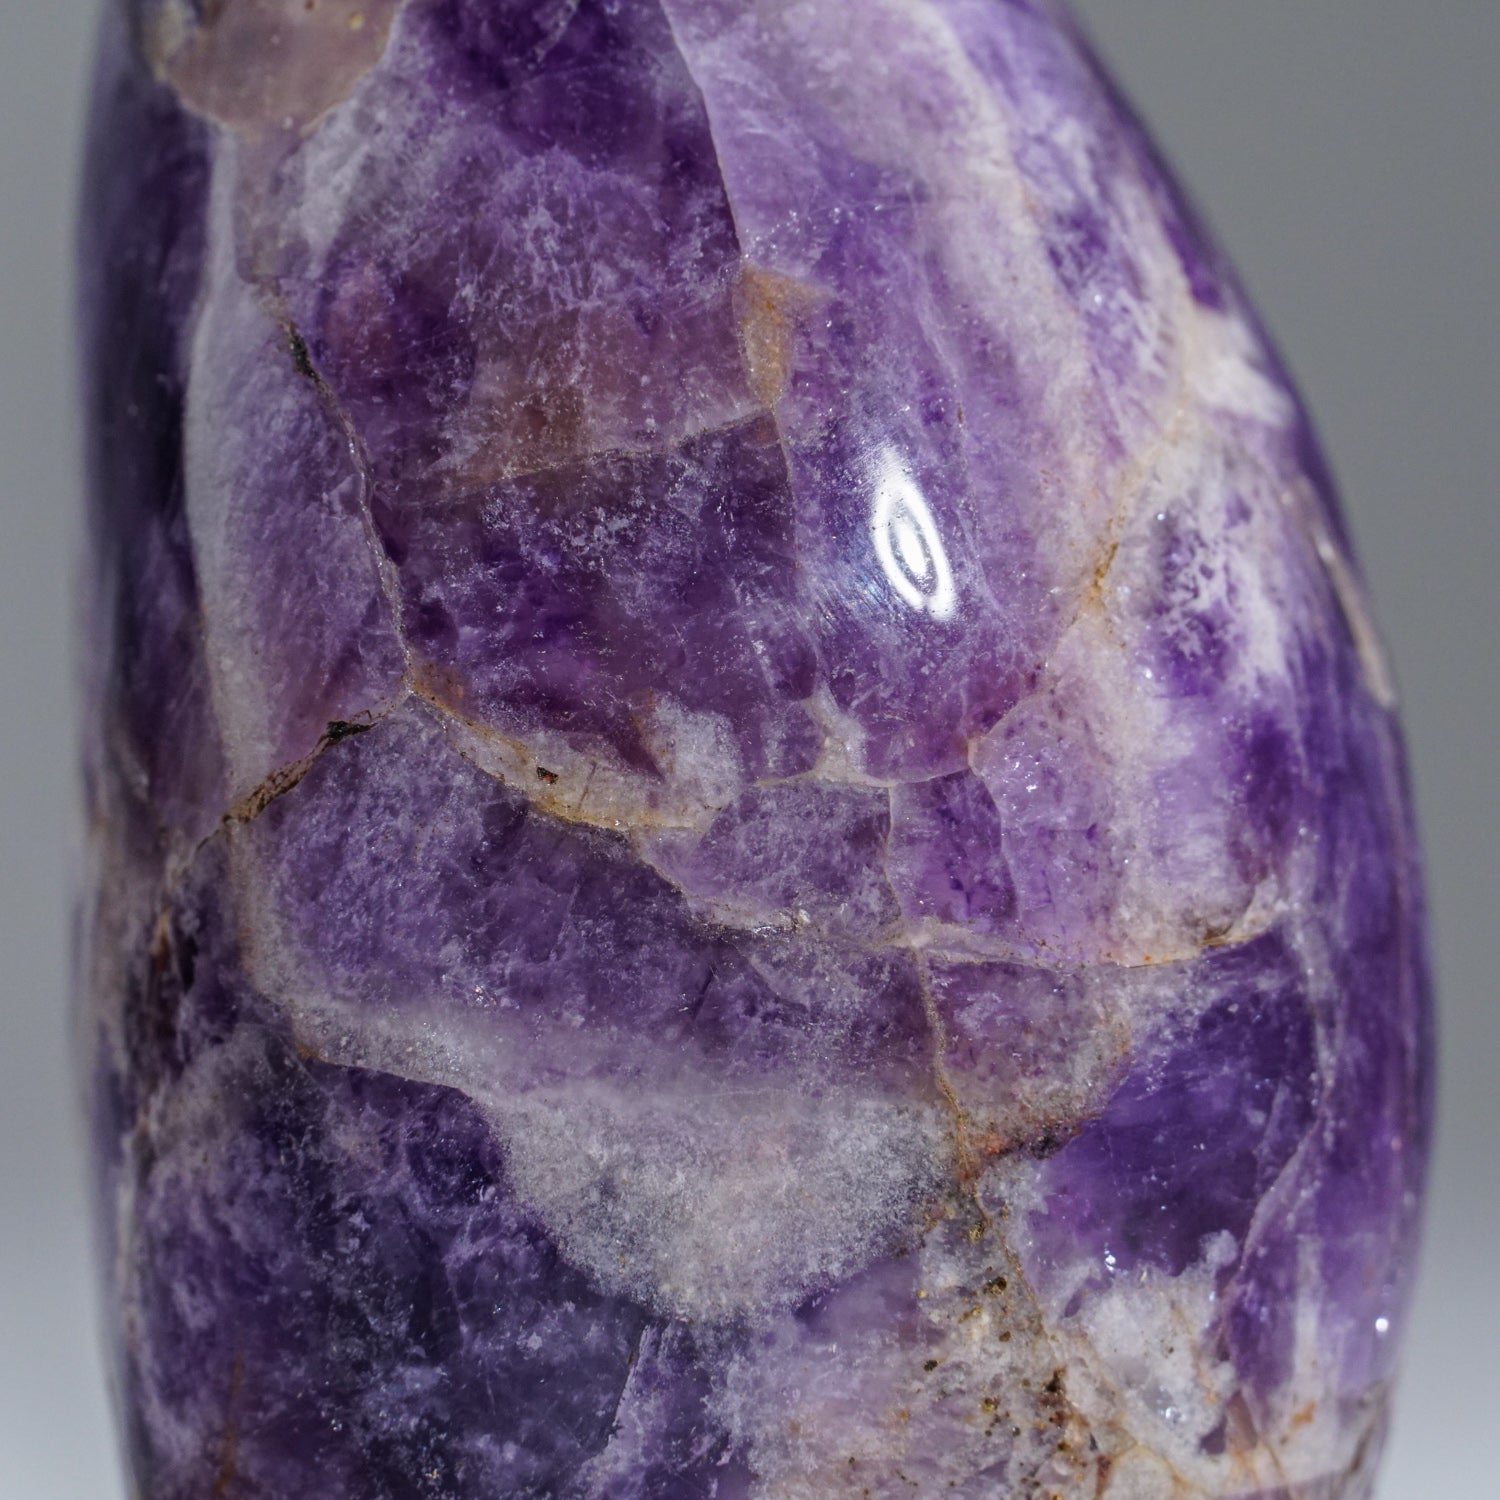 Polished Chevron Amethyst Freefrom from Brazil (1.4 lbs)